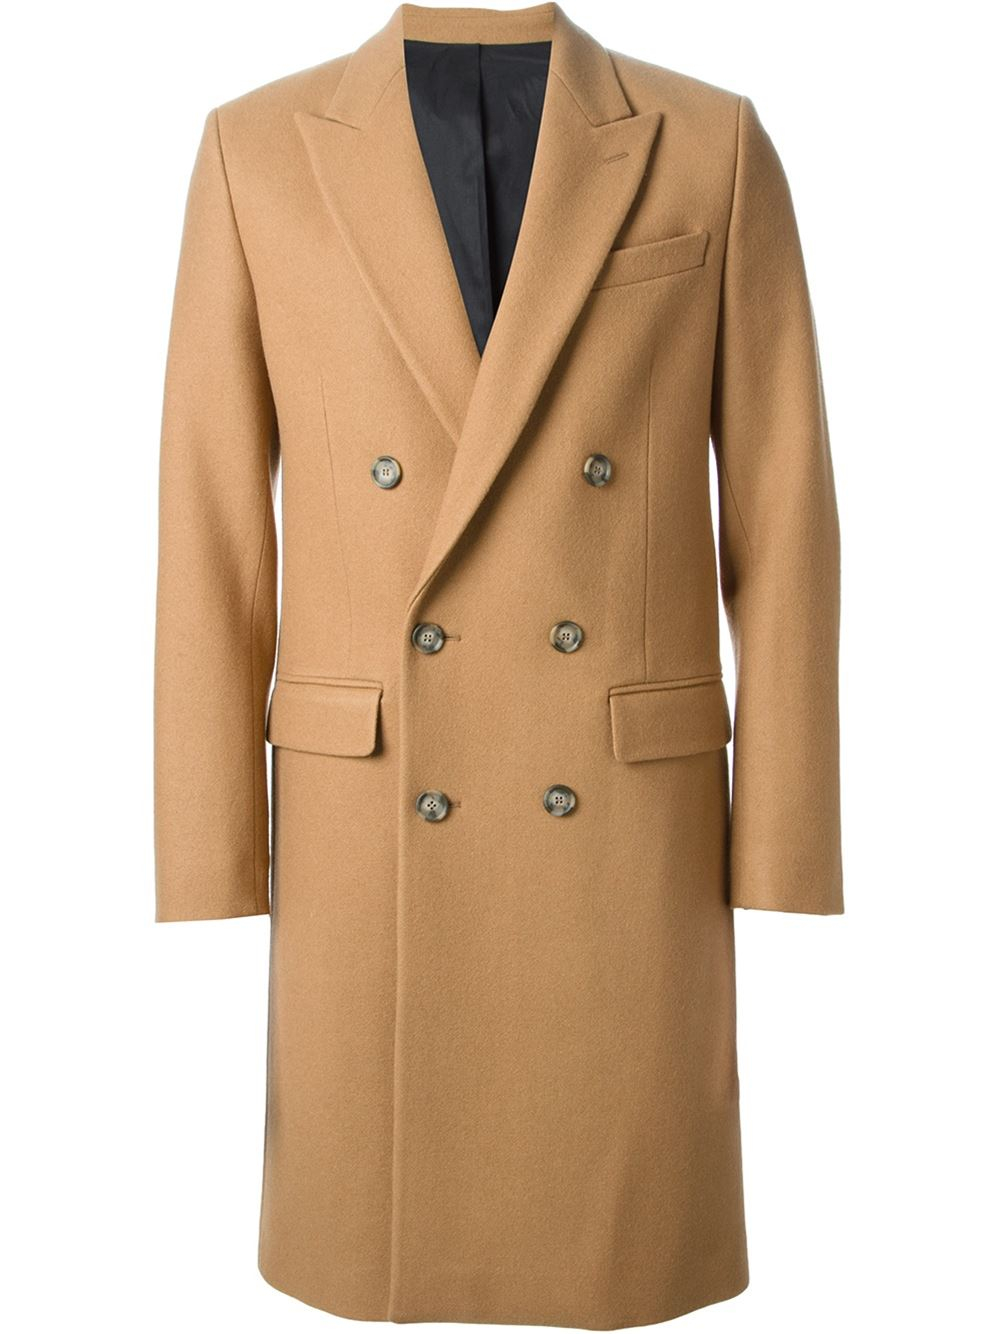 Lyst - Ami Classic Double Breasted Coat in Natural for Men